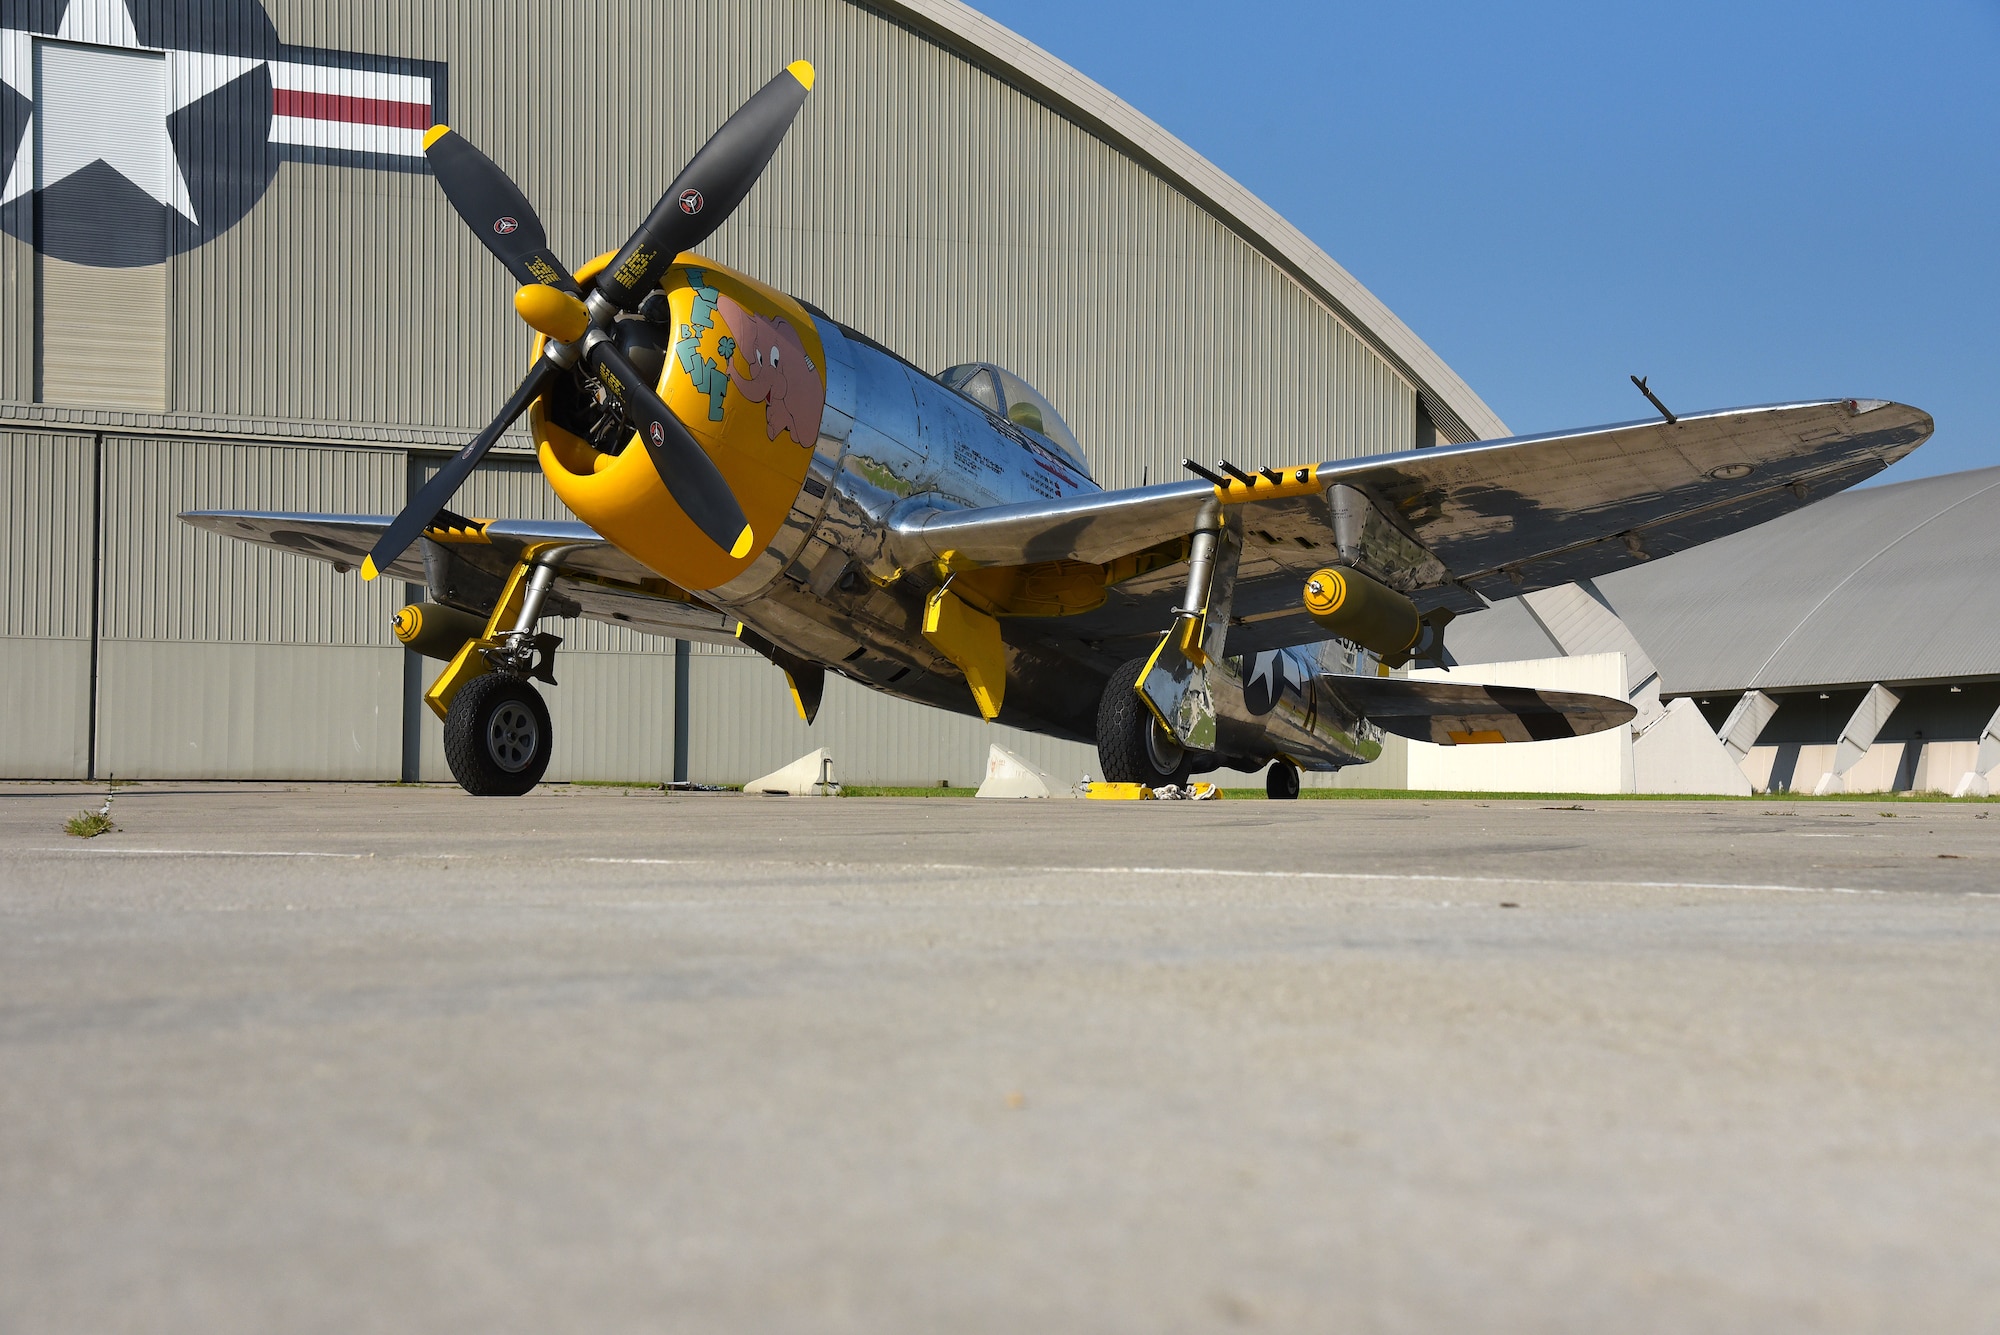 A view of the Republic P-47D (Bubble Canopy Version) before restoration crews at the National Museum of the U.S. Air Force moved the aircraft into the WWII Gallery on Aug. 14, 2018. Several WWII era aircraft on display were temporarily placed throughout the museum to provide adequate space for the Memphis Belle exhibit opening events. (U.S. Air Force photo by Ken LaRock)